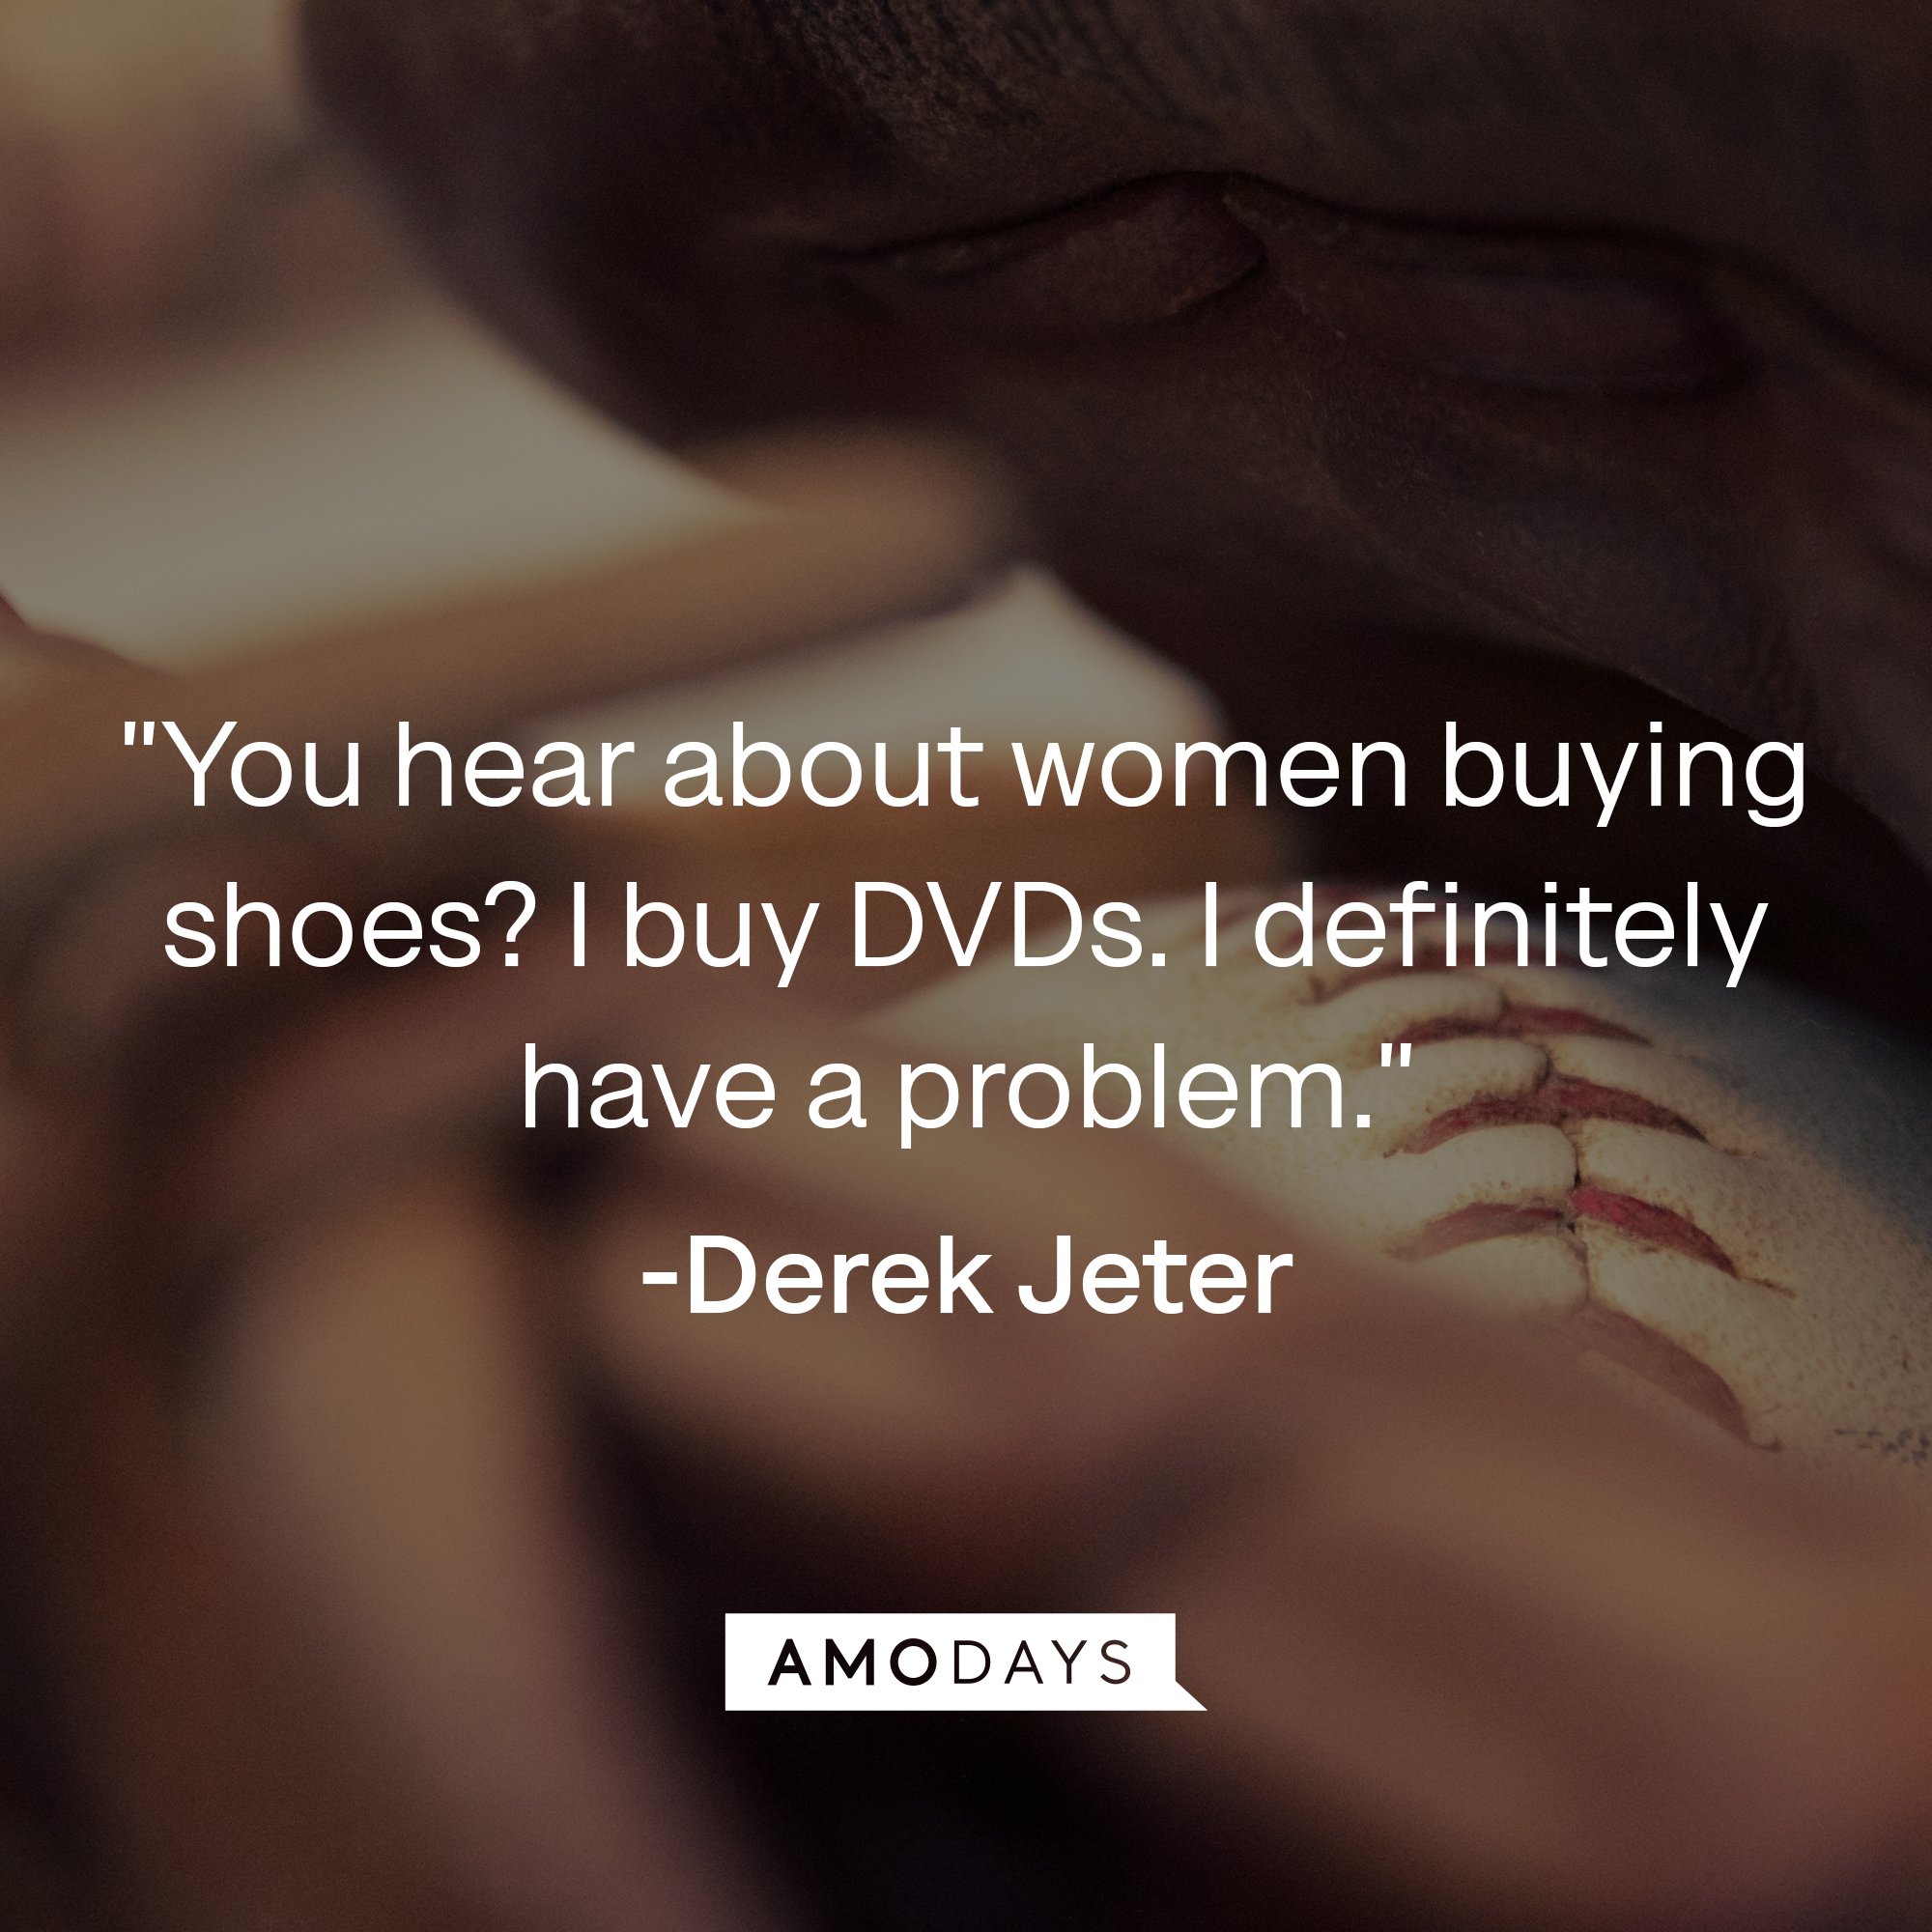 Derek Jeter's quote: "You hear about women buying shoes? I buy DVDs. I definitely have a problem." | Image: AmoDays